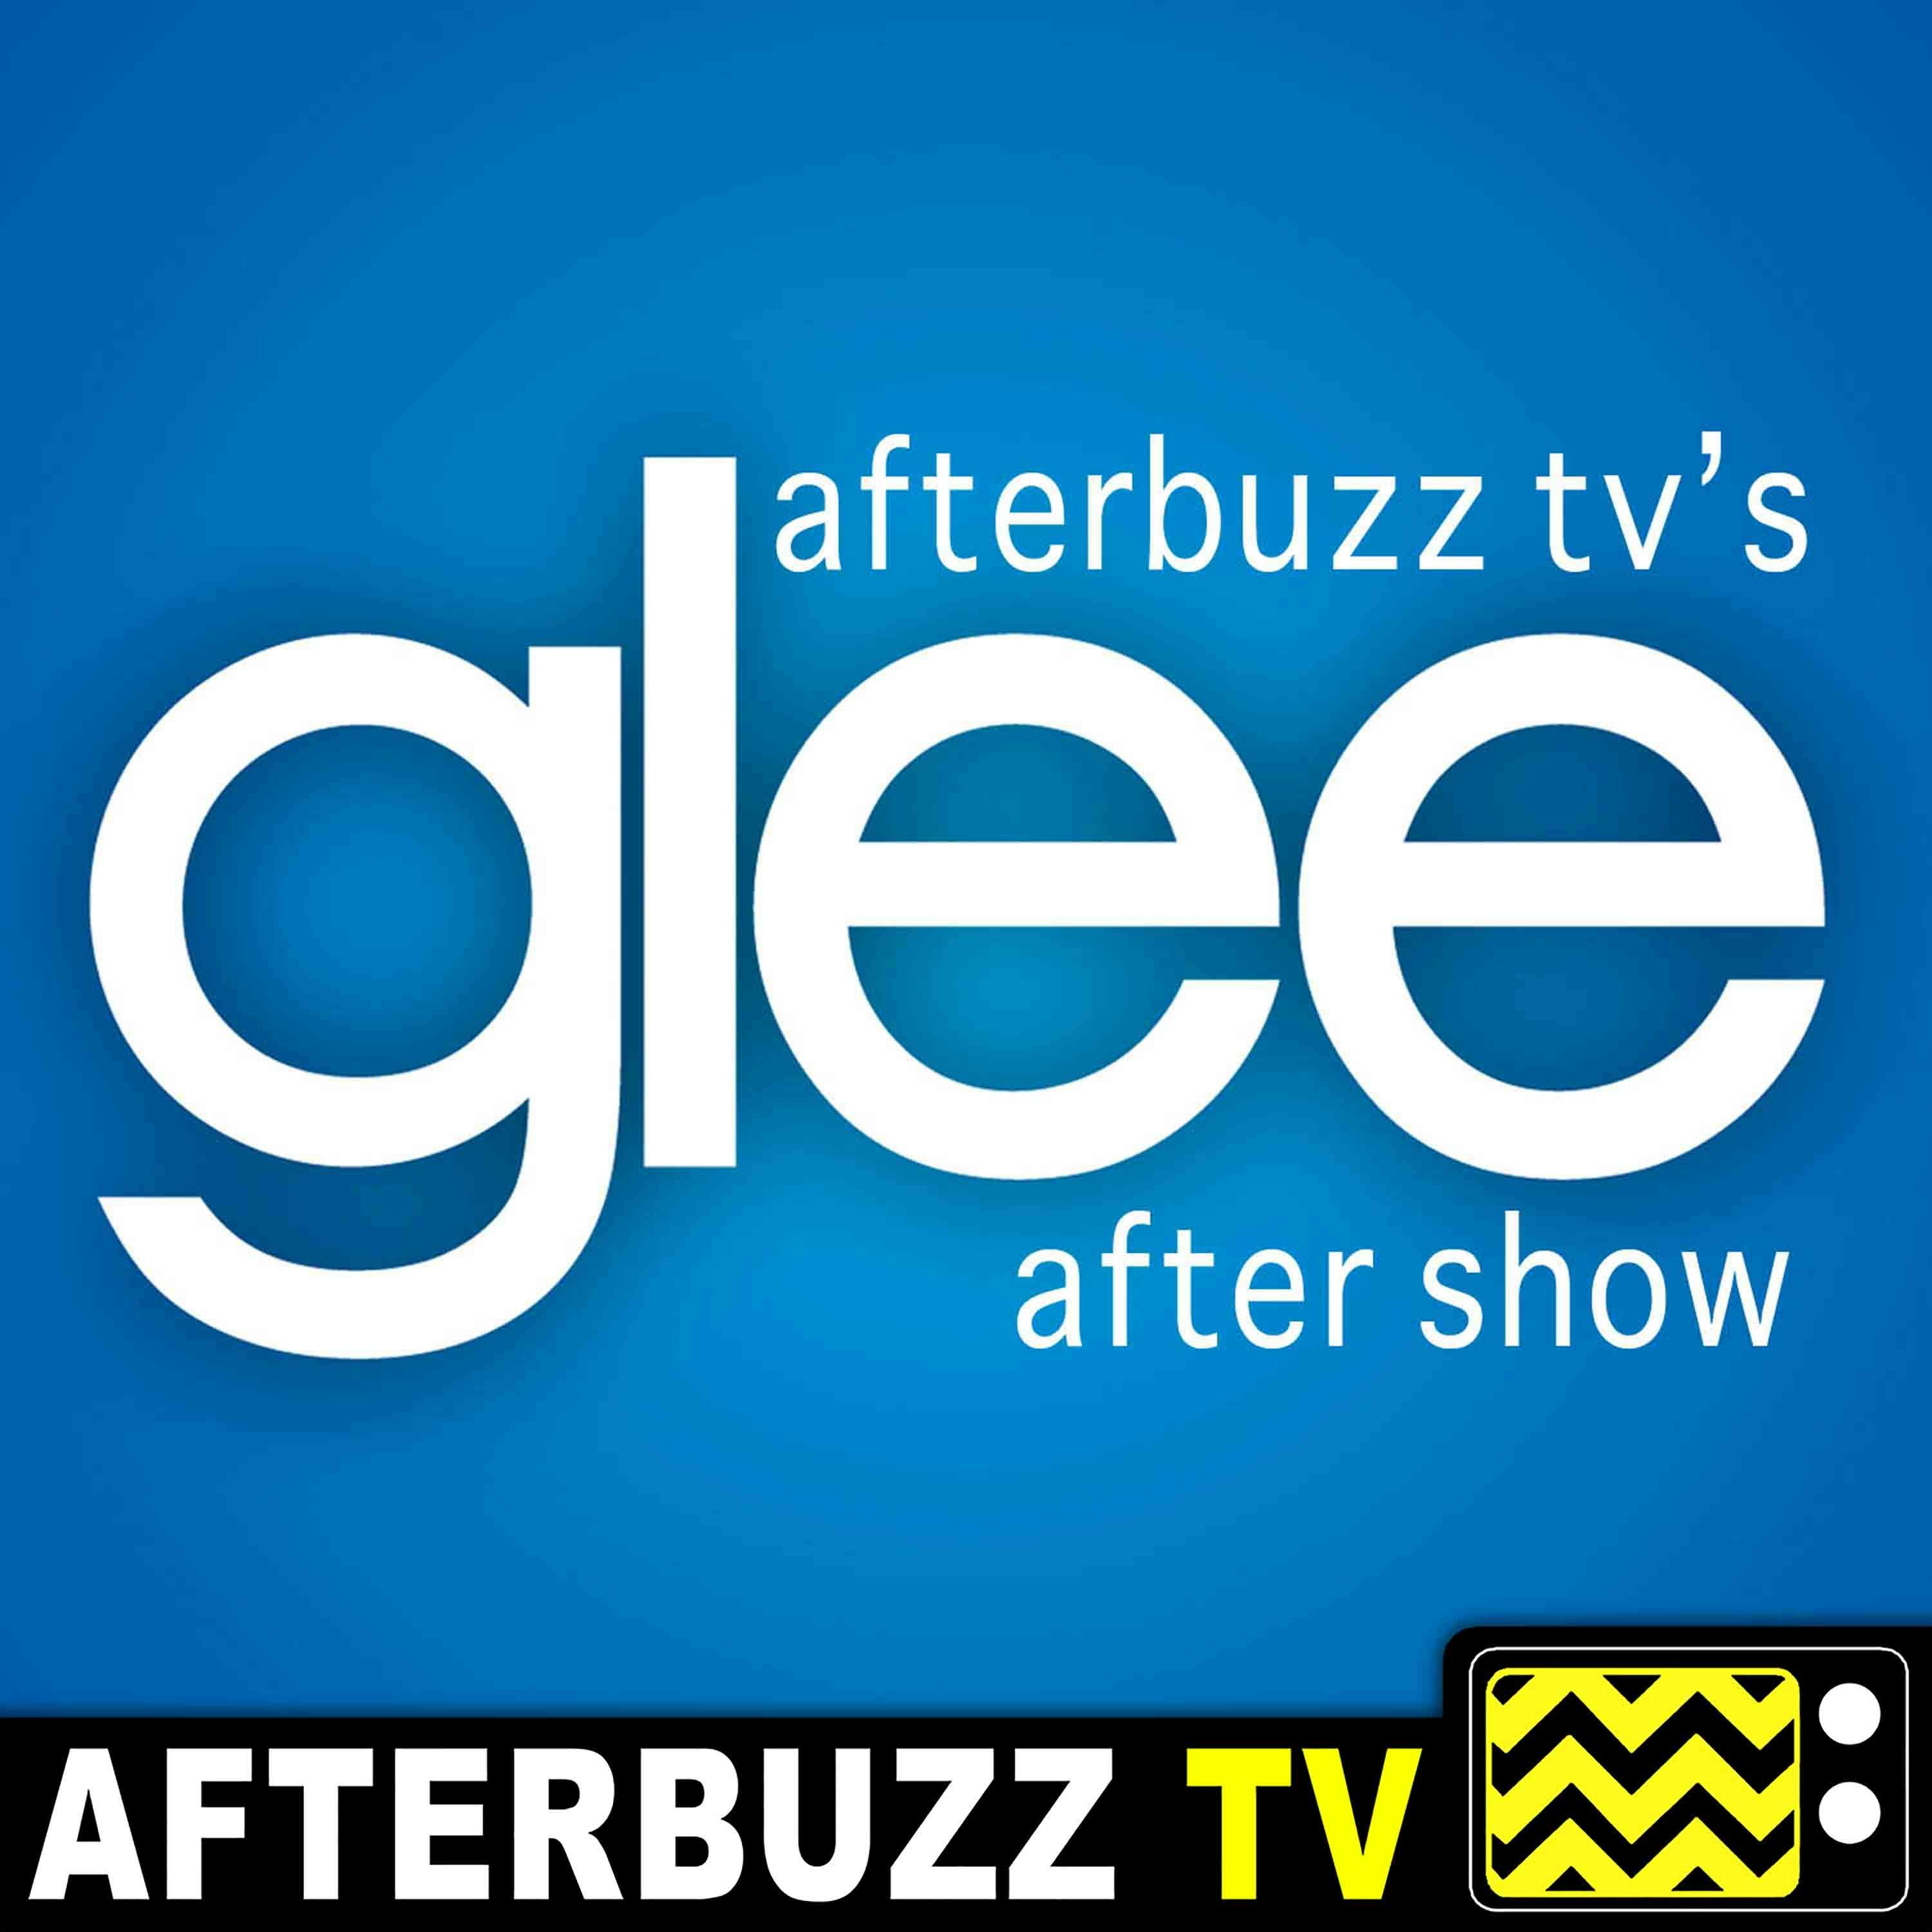 Glee S:6 | We Built This Glee Club E:11 | AfterBuzz TV AfterShow